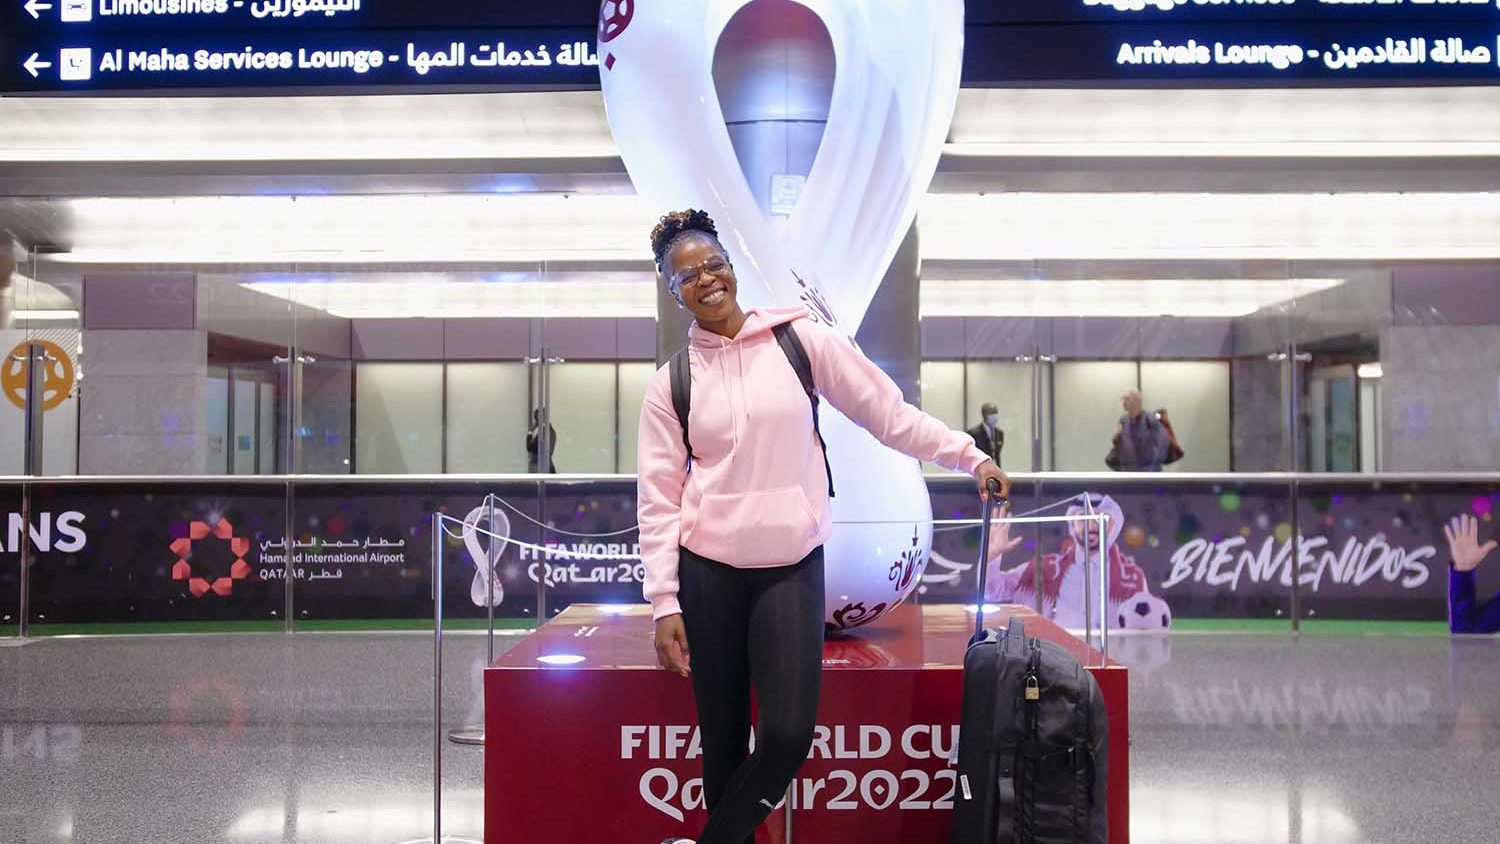 Mamelodi Sundowns Ladies frontwoman Andisiwe Mgcoy on her arrival in Qatar airport.